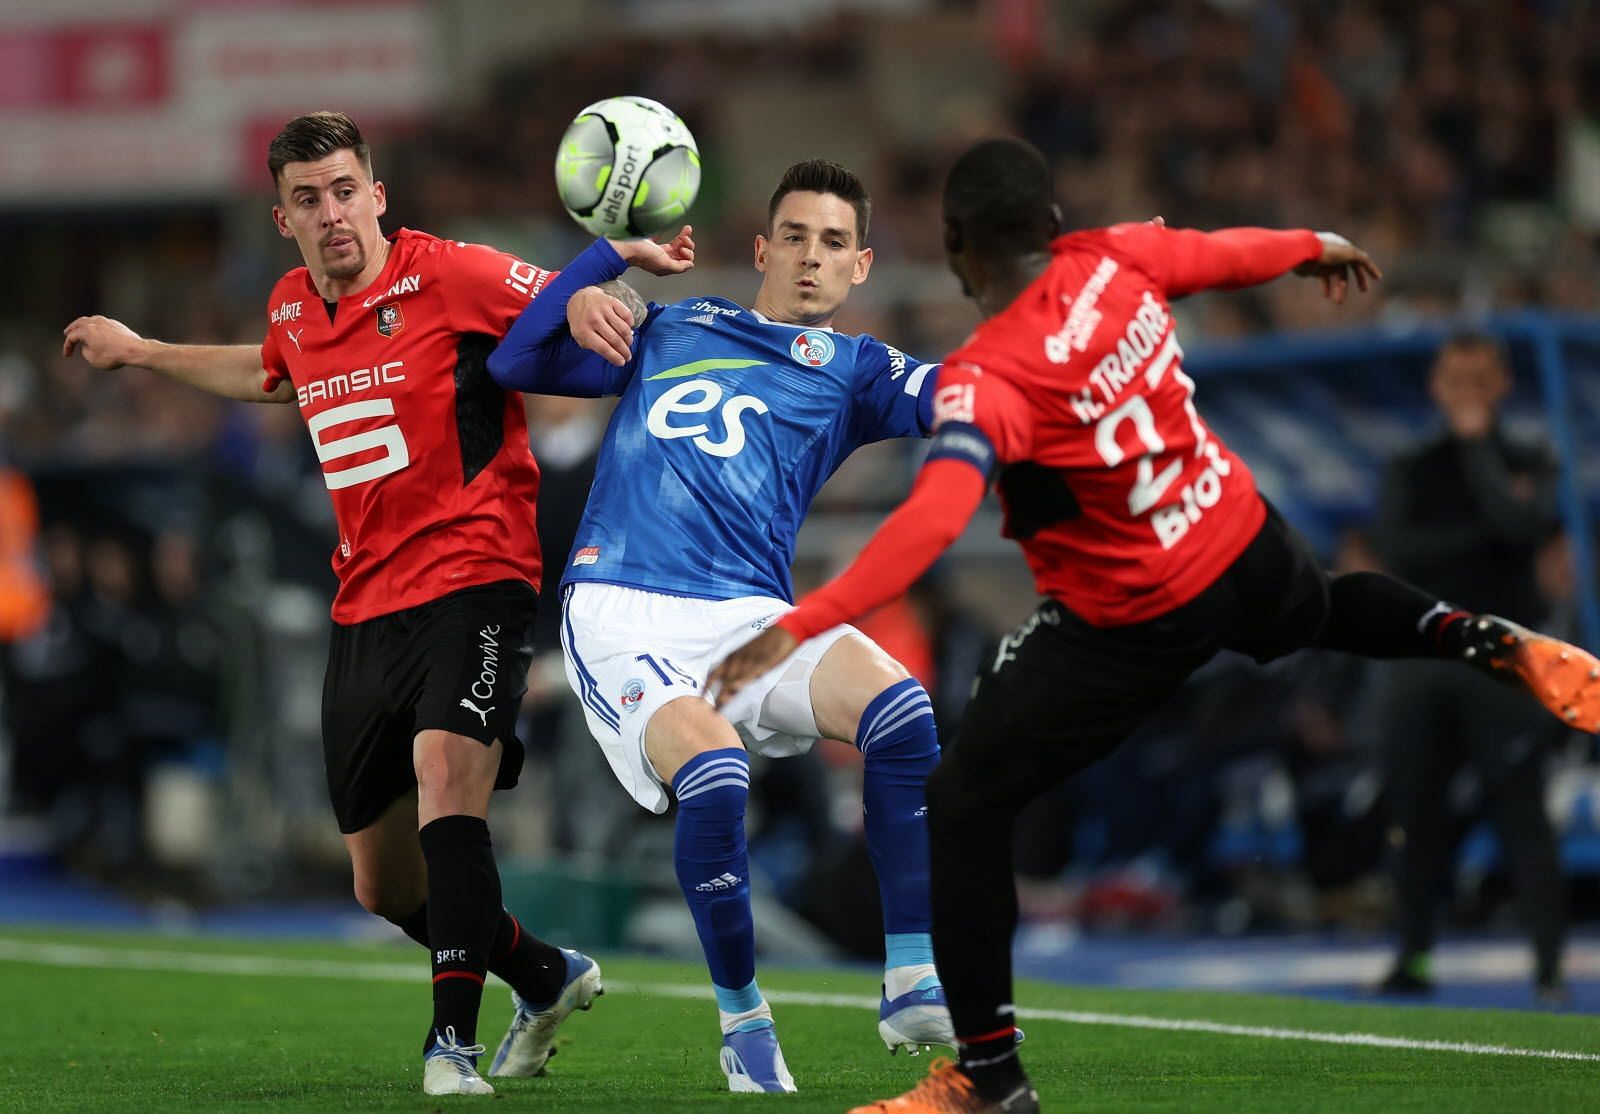 Strasbourg and Rennes lock horns in Ligue 1 on Saturday